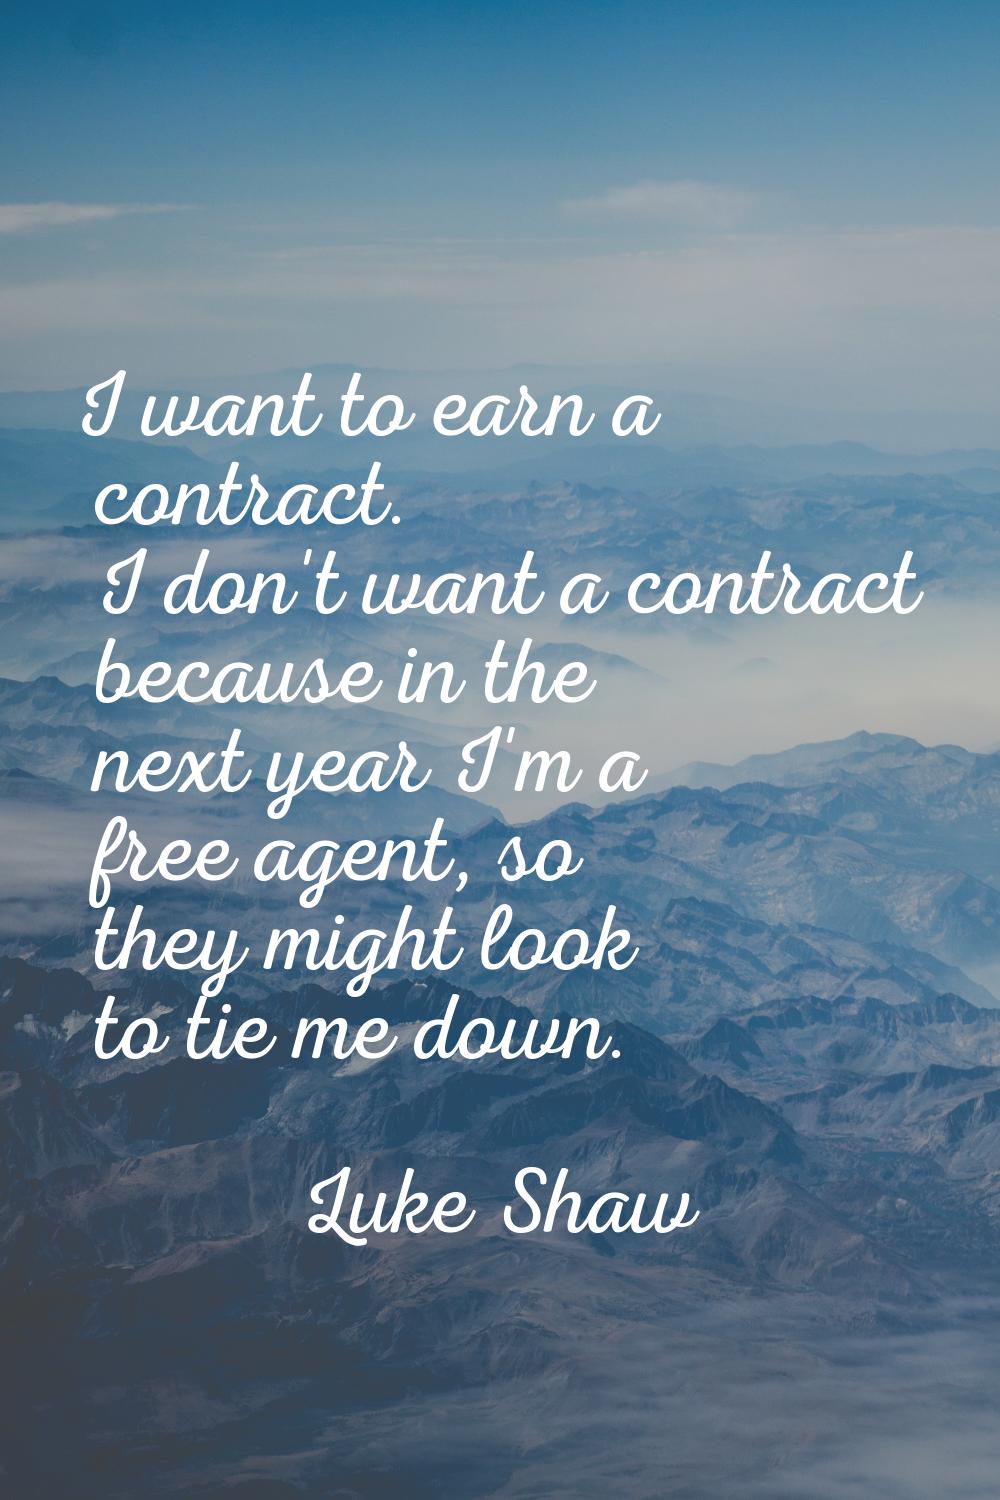 I want to earn a contract. I don't want a contract because in the next year I'm a free agent, so th